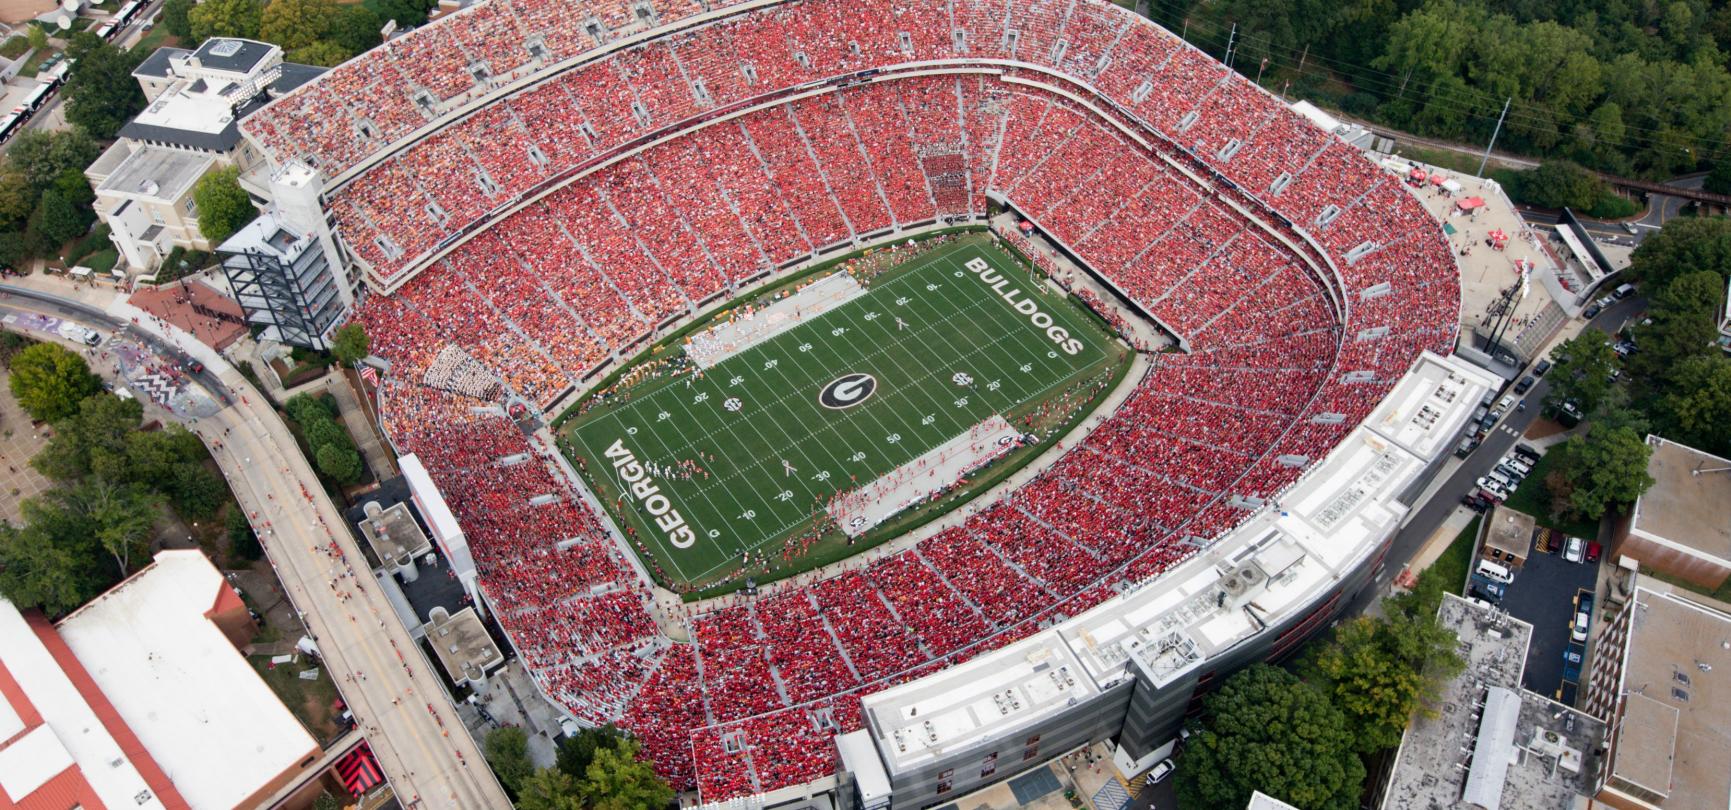 Where to Watch the UGA Football Game in Athens, GA